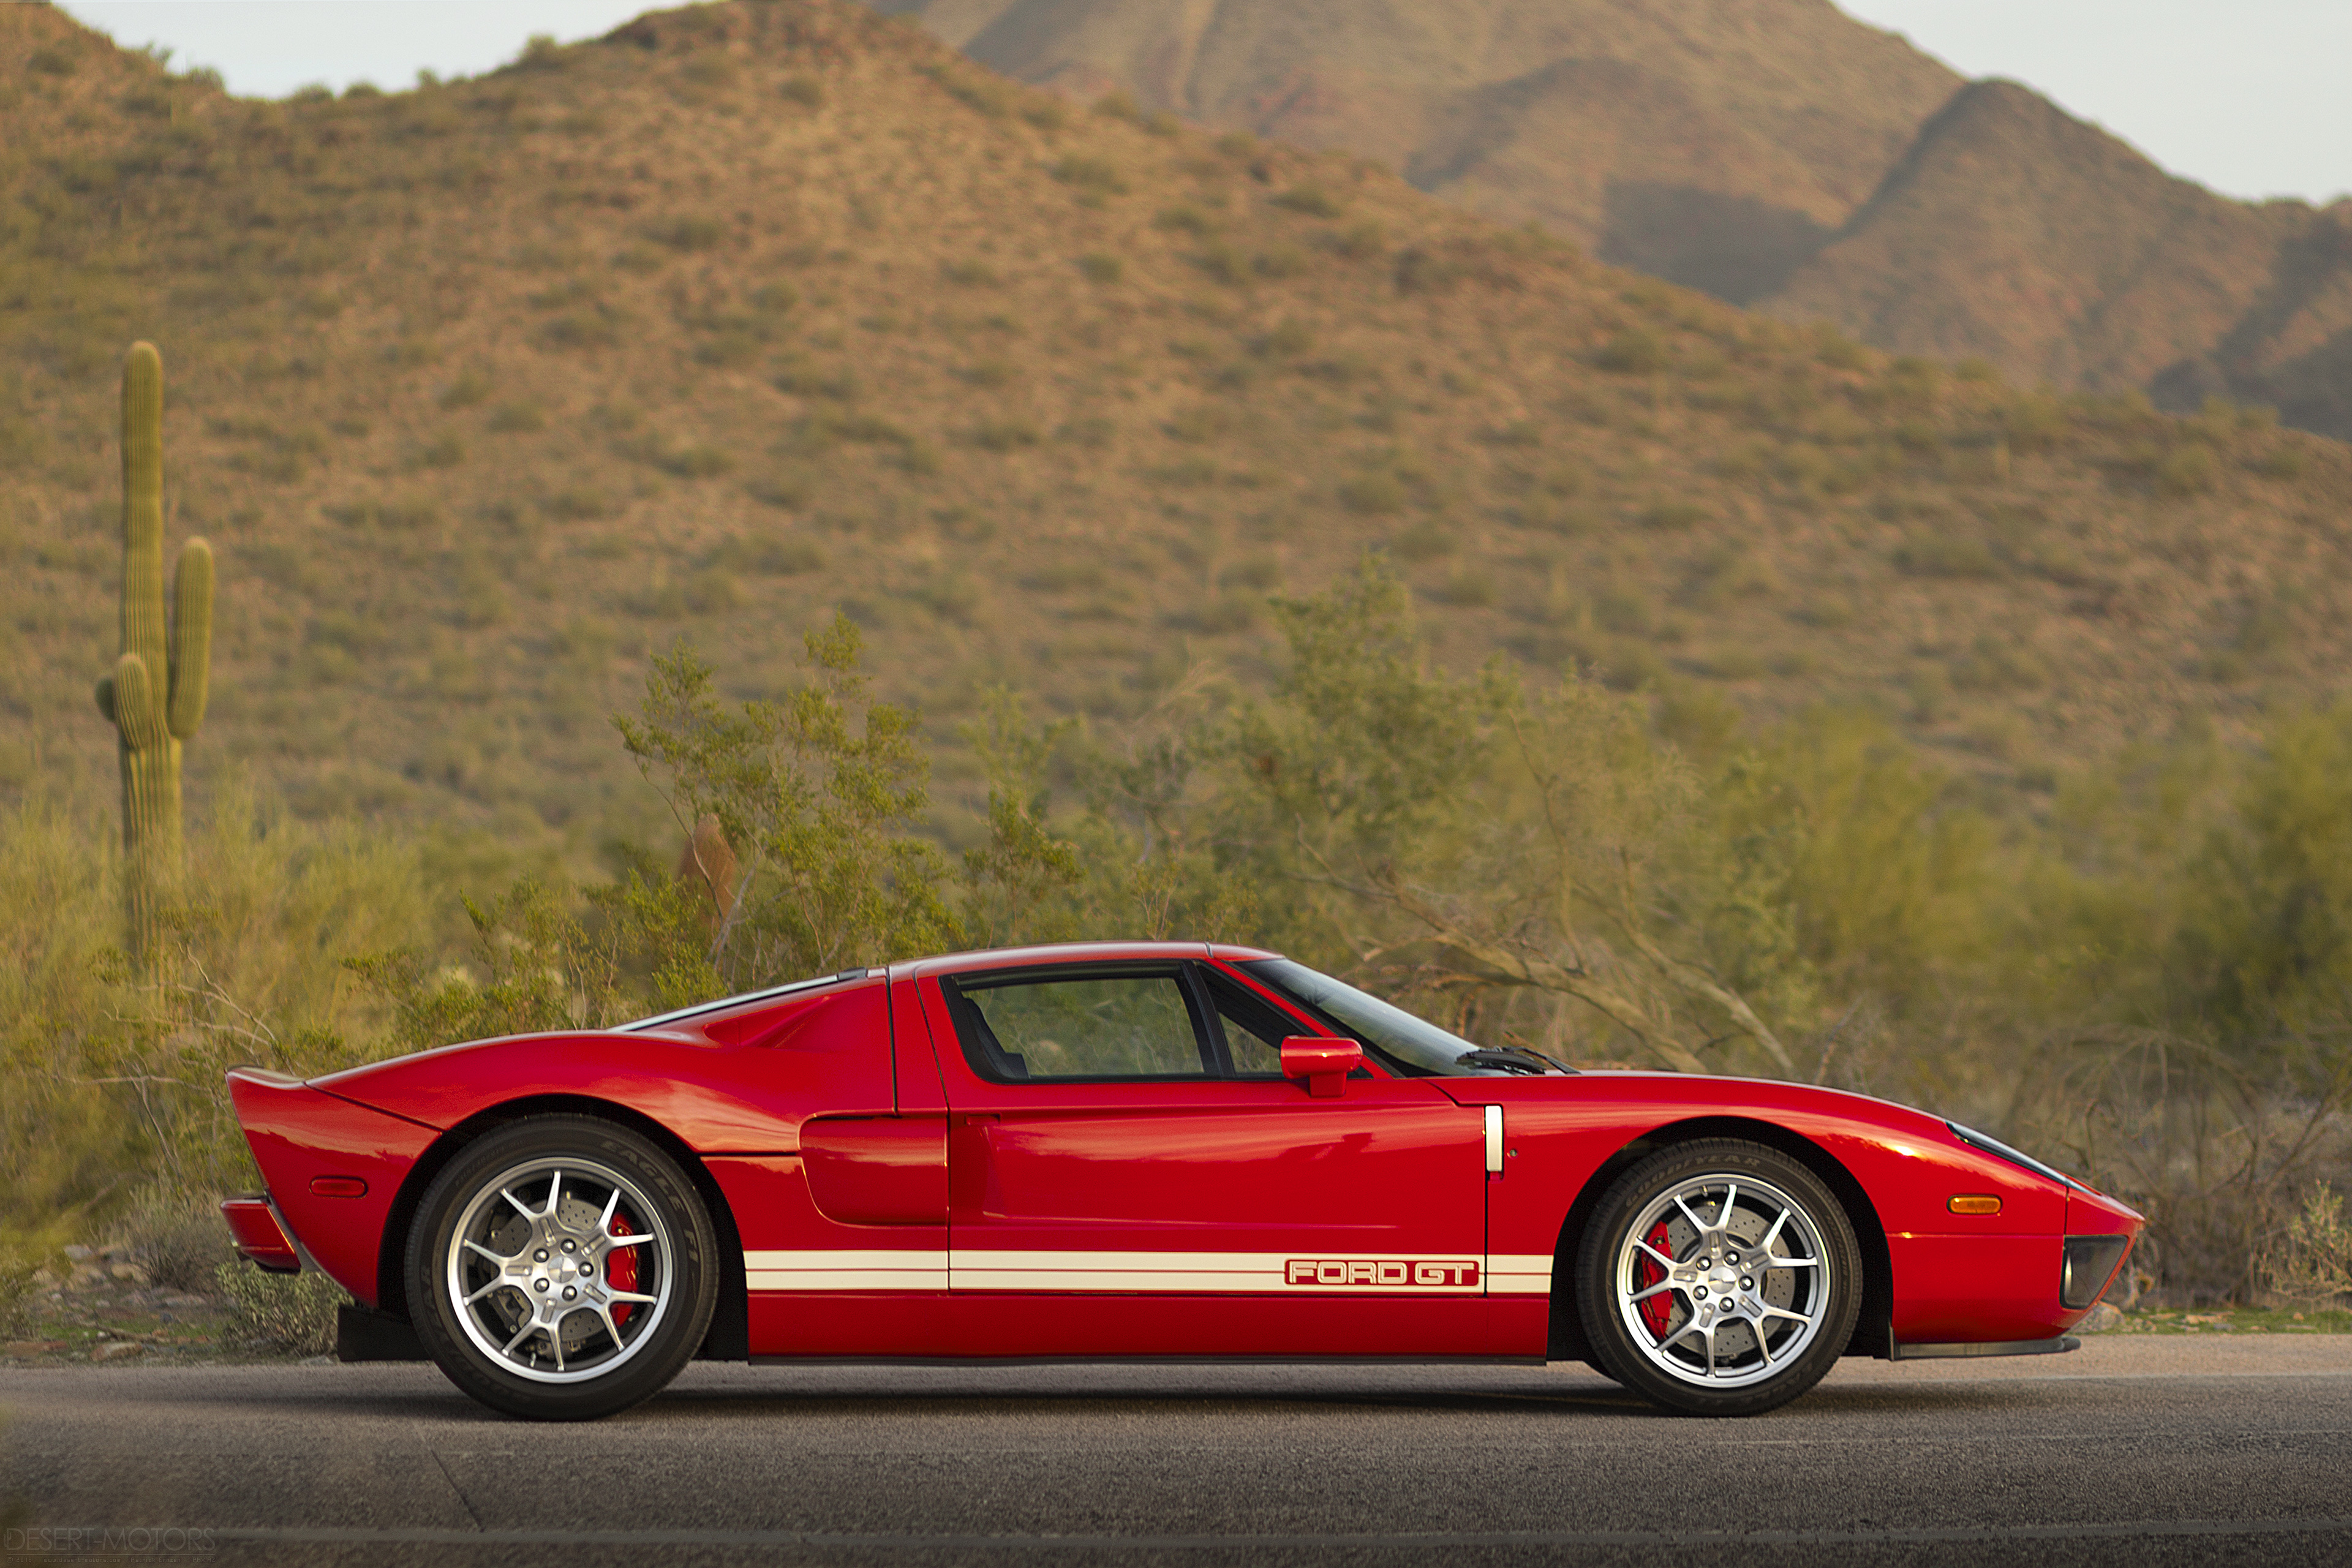 Ford GT Red Cars Desert Sports Car American Cars 3840x2560